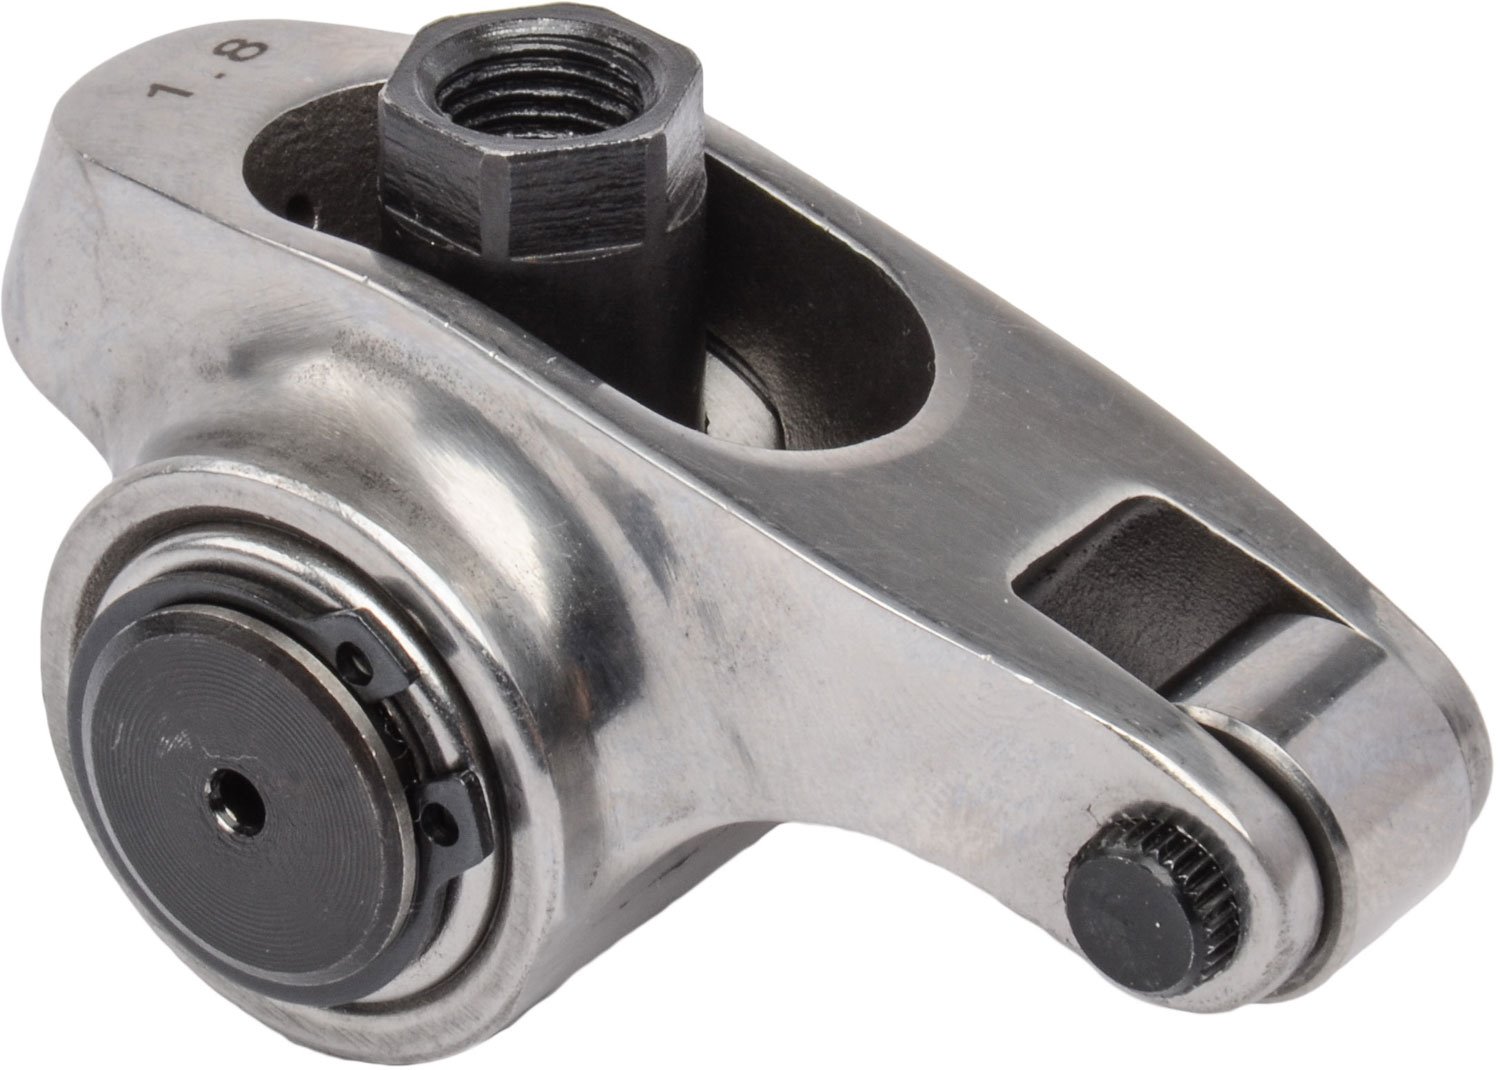 Stainless Steel Rocker Arms for Chevy LS